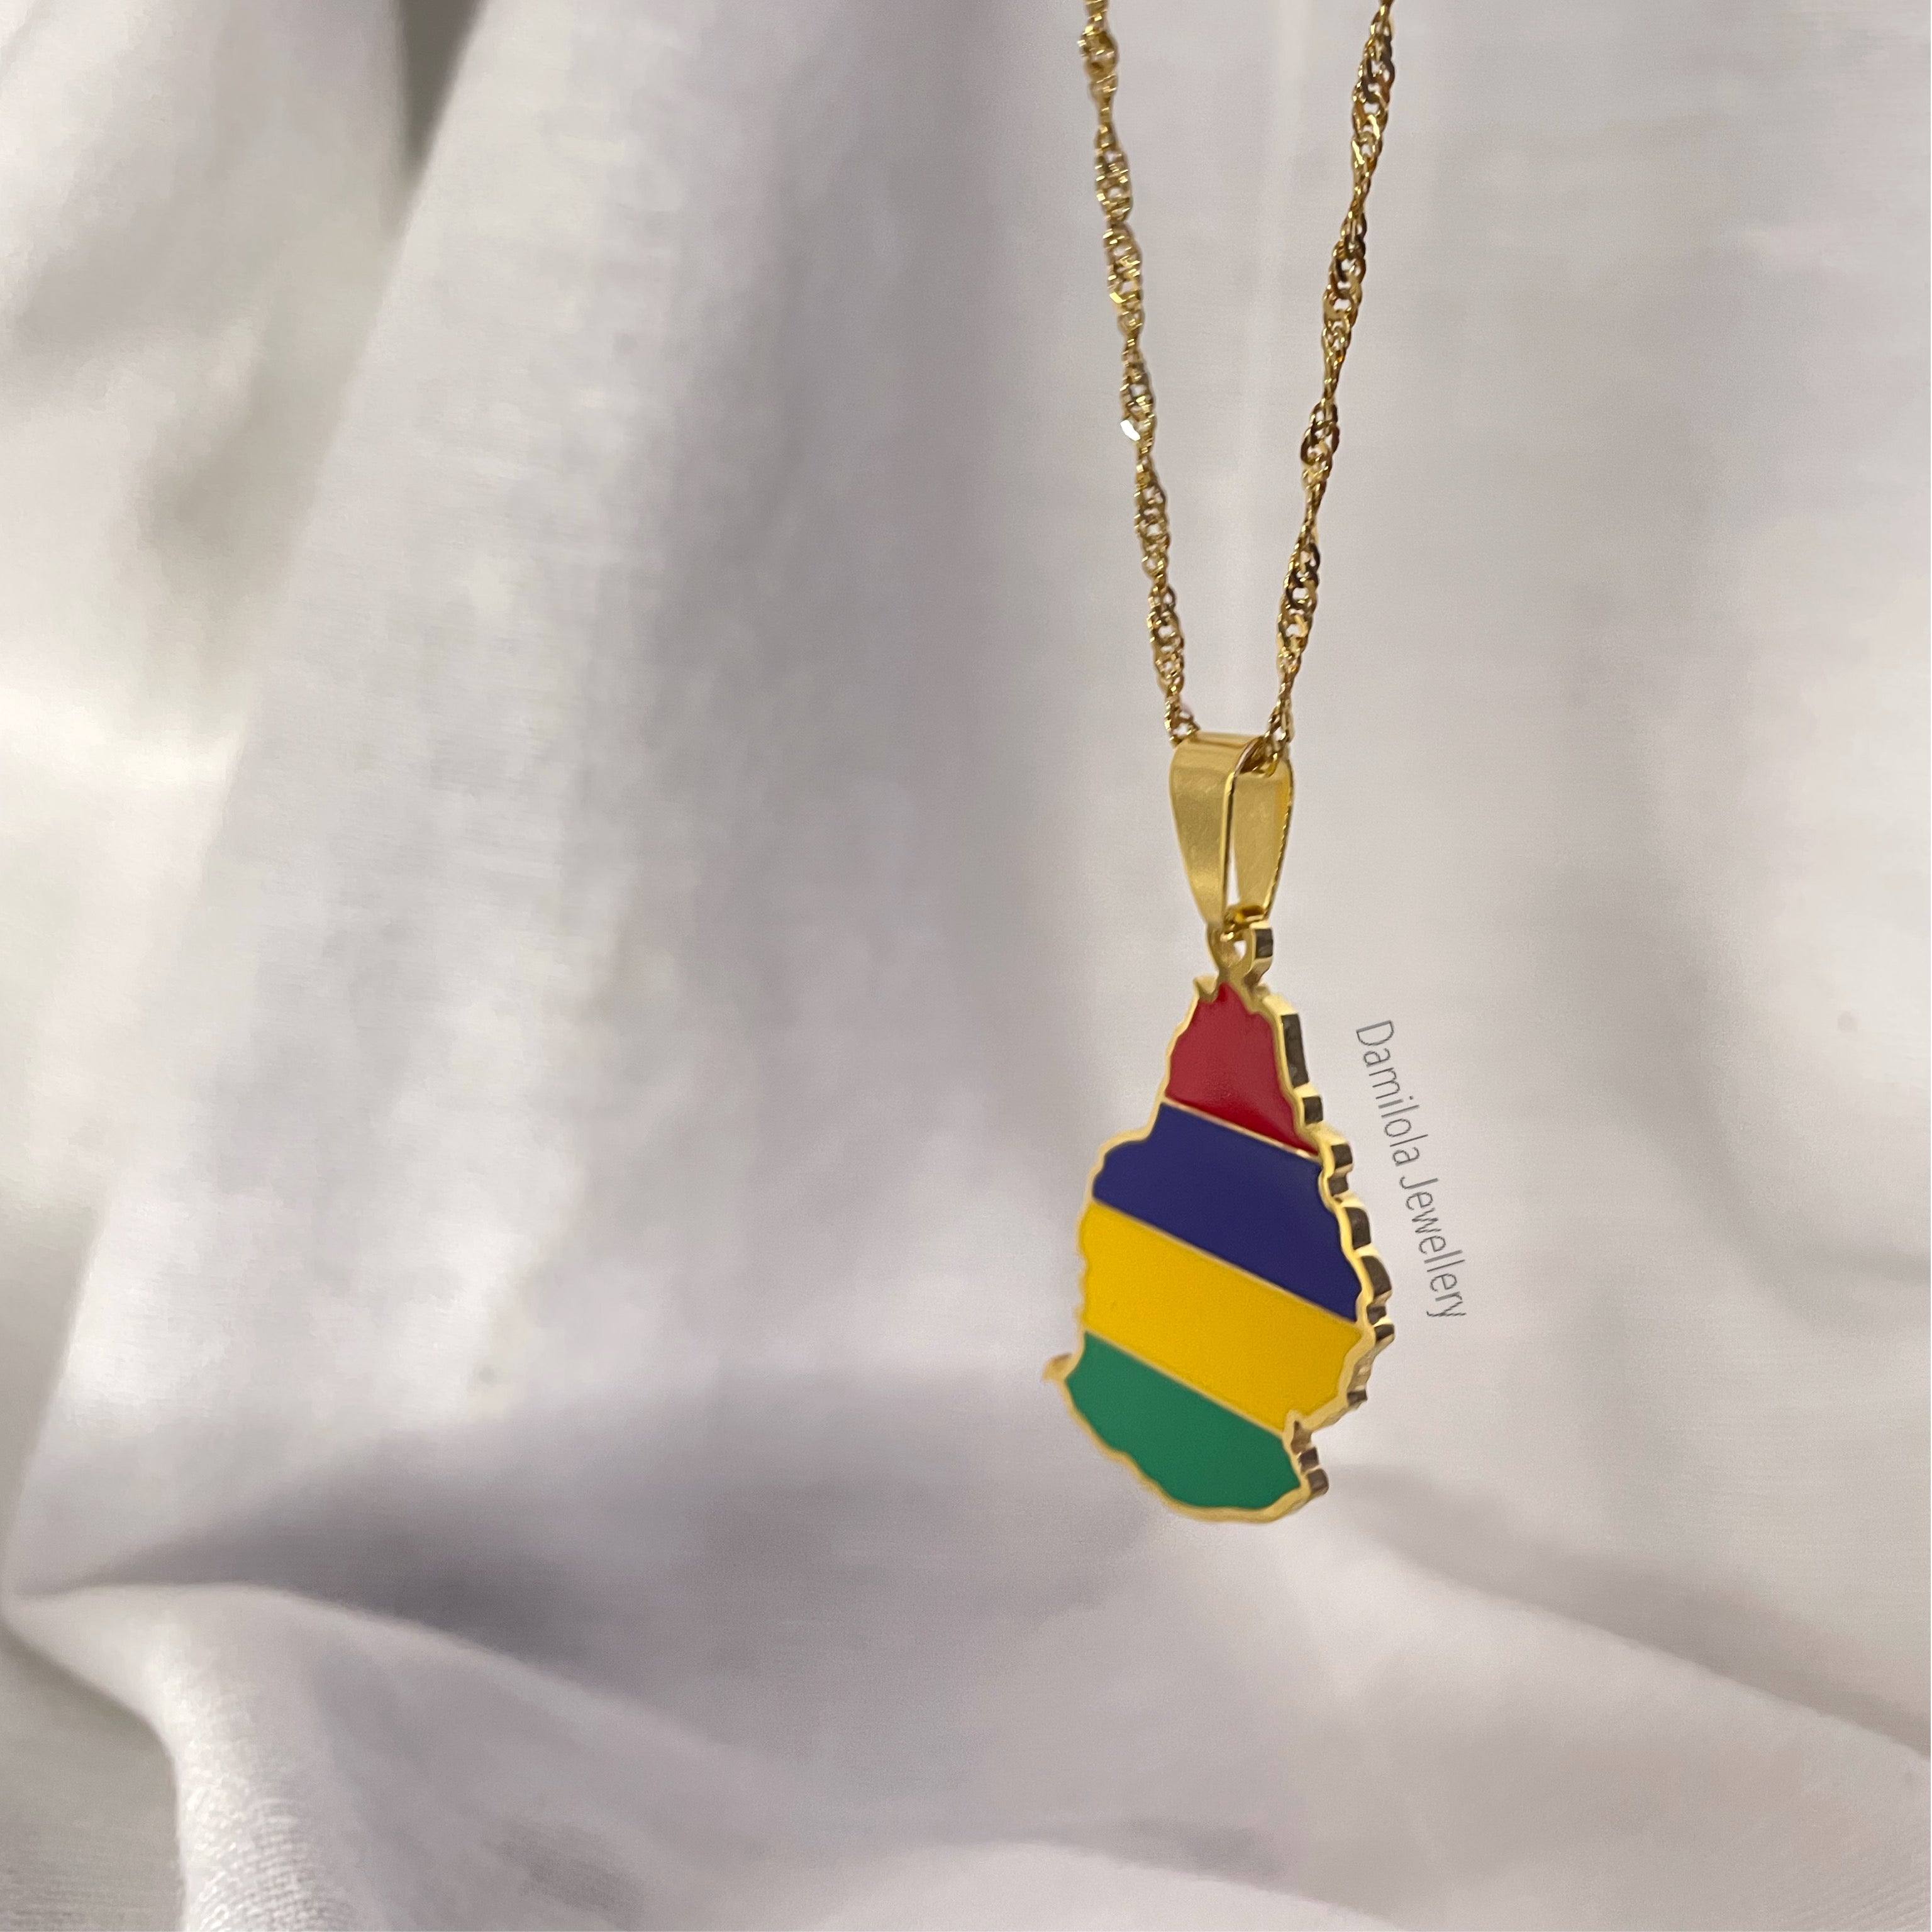 Mauritius Flag Necklace 🇲🇺 2 Styles